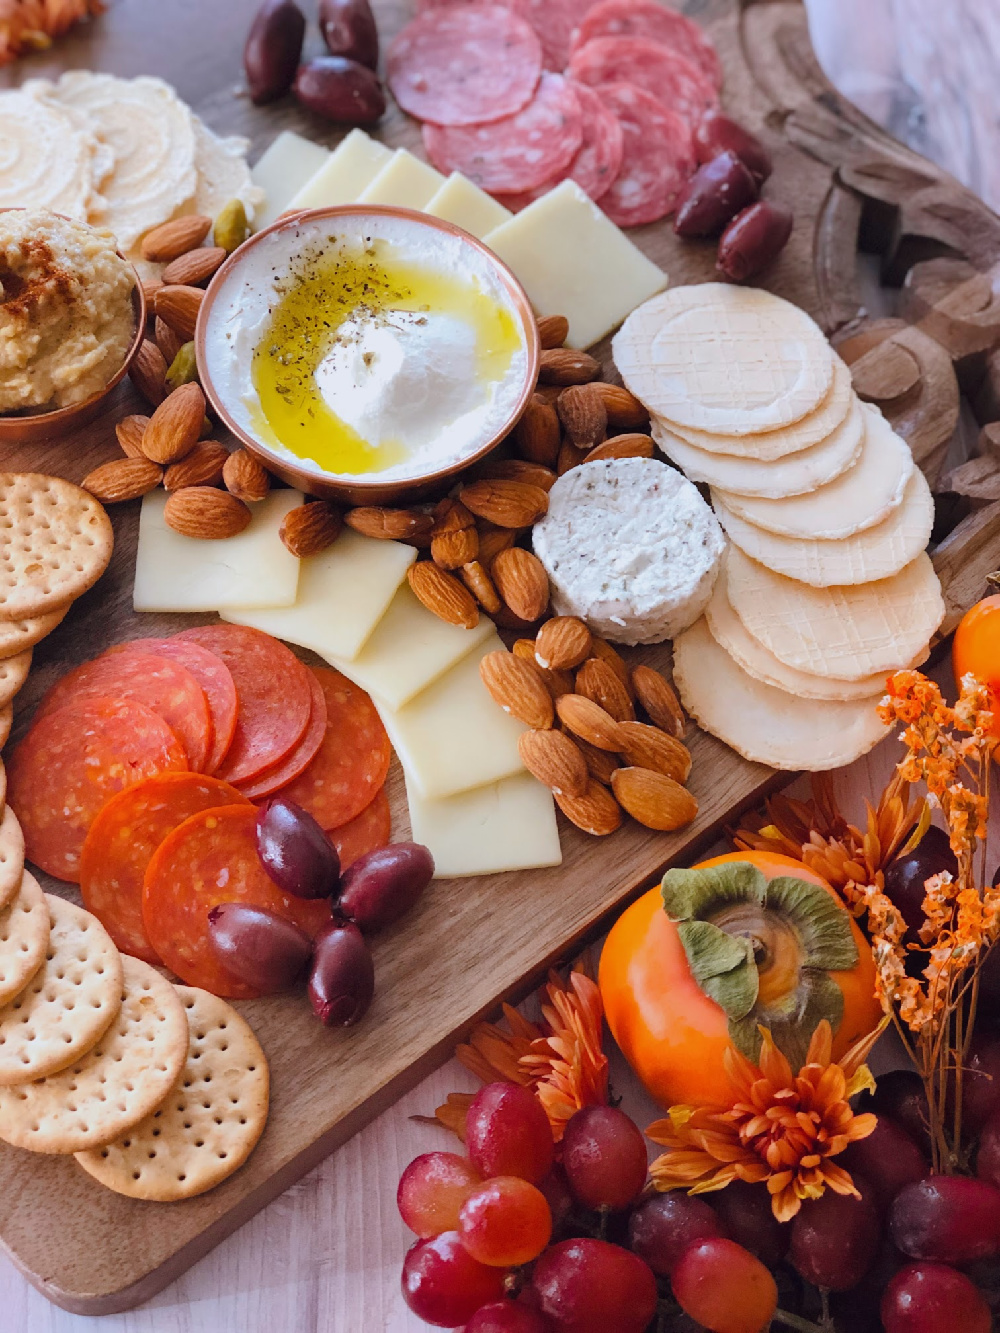 Inspired by the flavors of the Mediterranean cuisine, we put together a delightful Thanksgiving charcuterie board perfect for including in the appetizer table. This cheeseboard has European cold cuts, hard and soft cheeses, almonds and pistachios, crackers, kalamata olives, labneh, and hummus with garlic